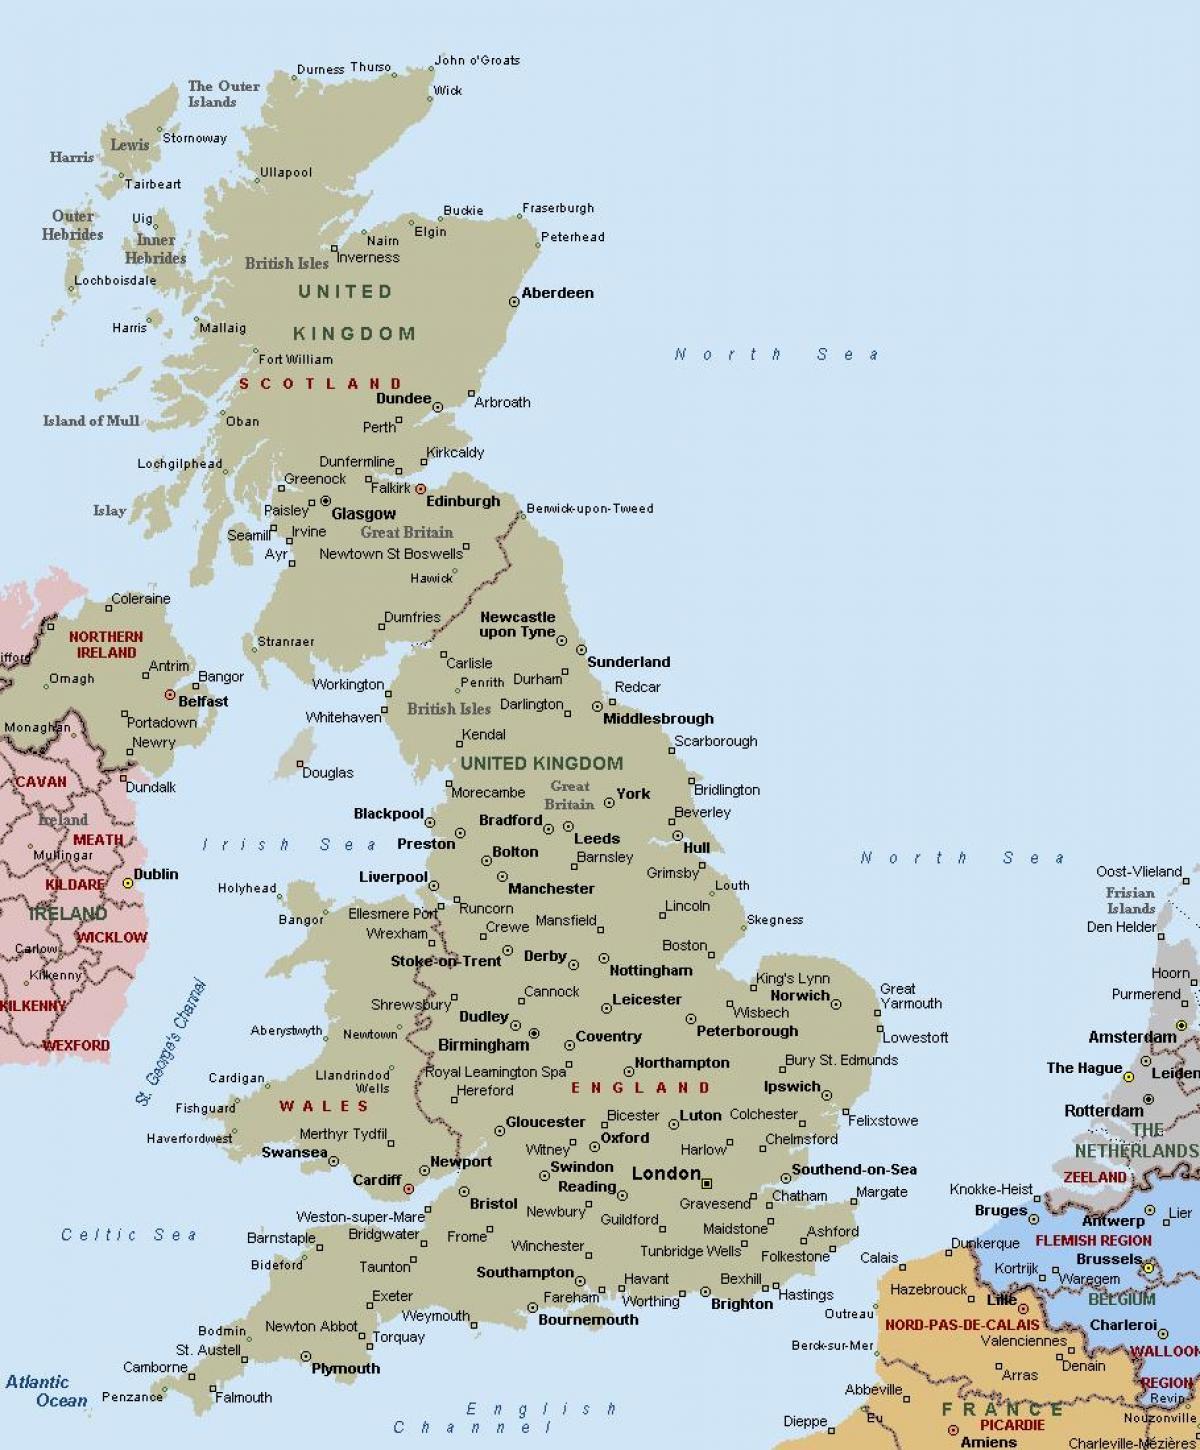 Map Of Great Britain Showing Towns And Cities - Sacha Clotilda